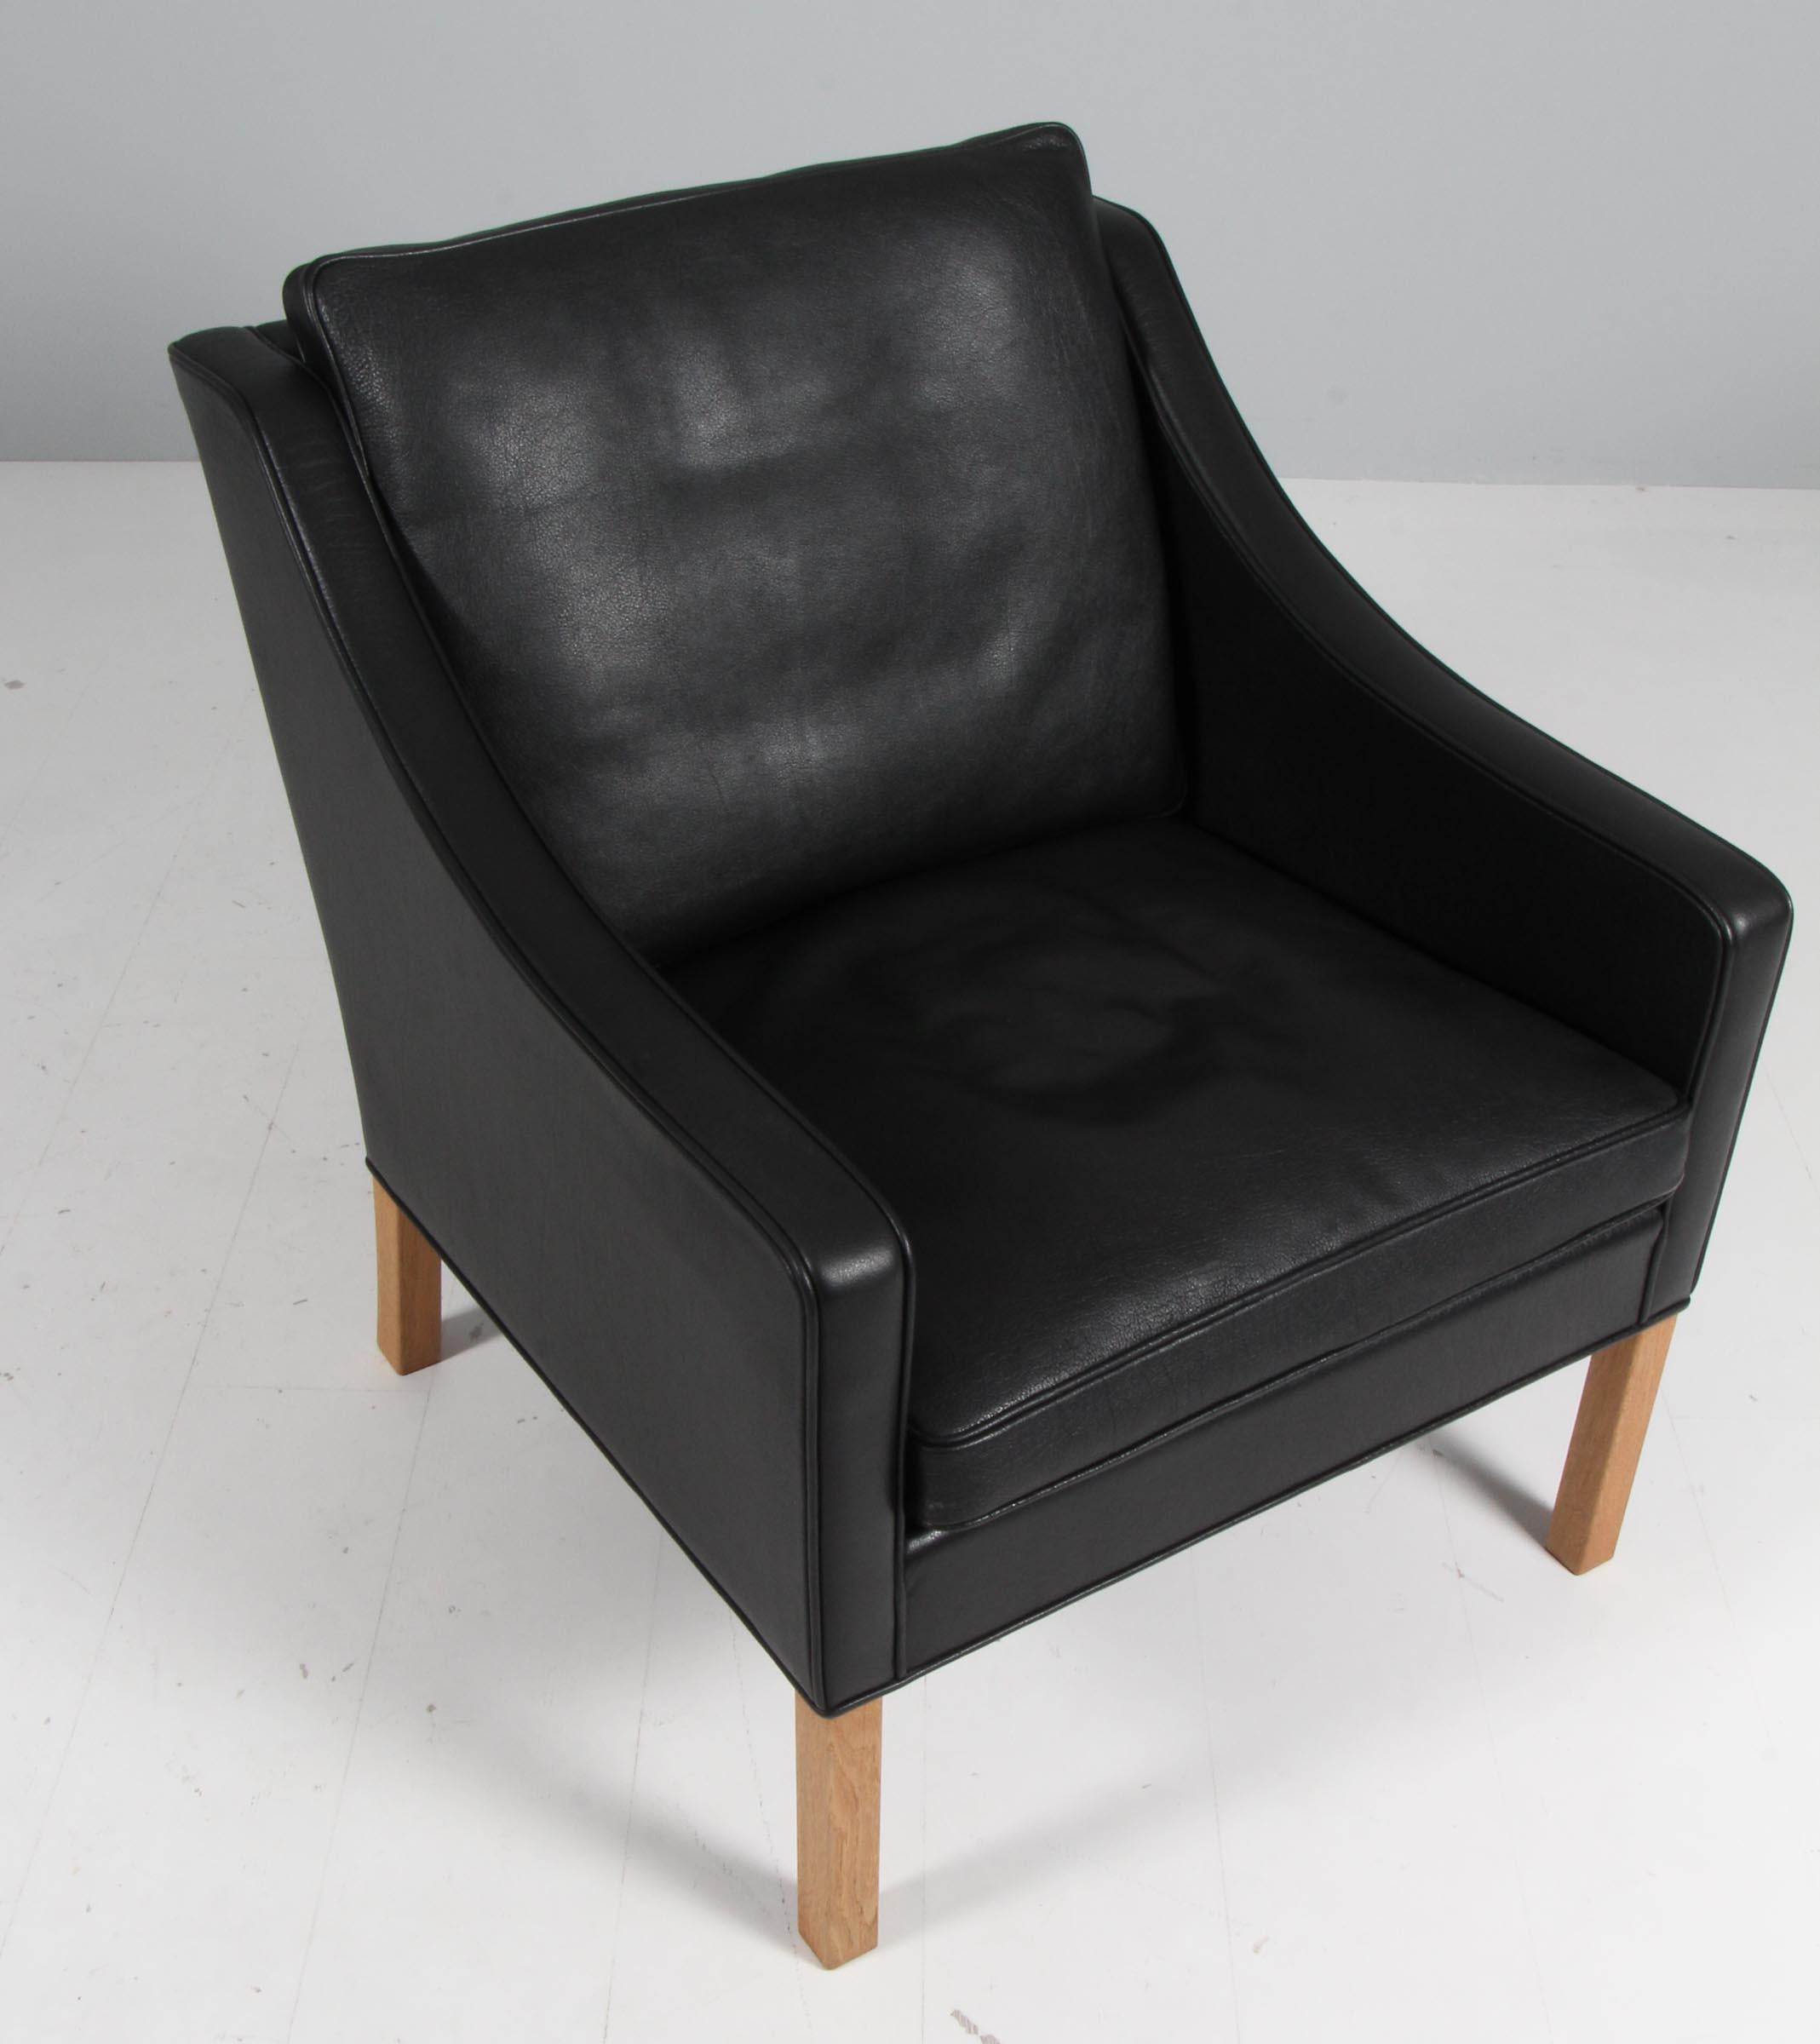 Børge Mogensen lounge chair original upholstered with black leather.

Legs of oak.

Model 2207, made by Fredericia furniture.